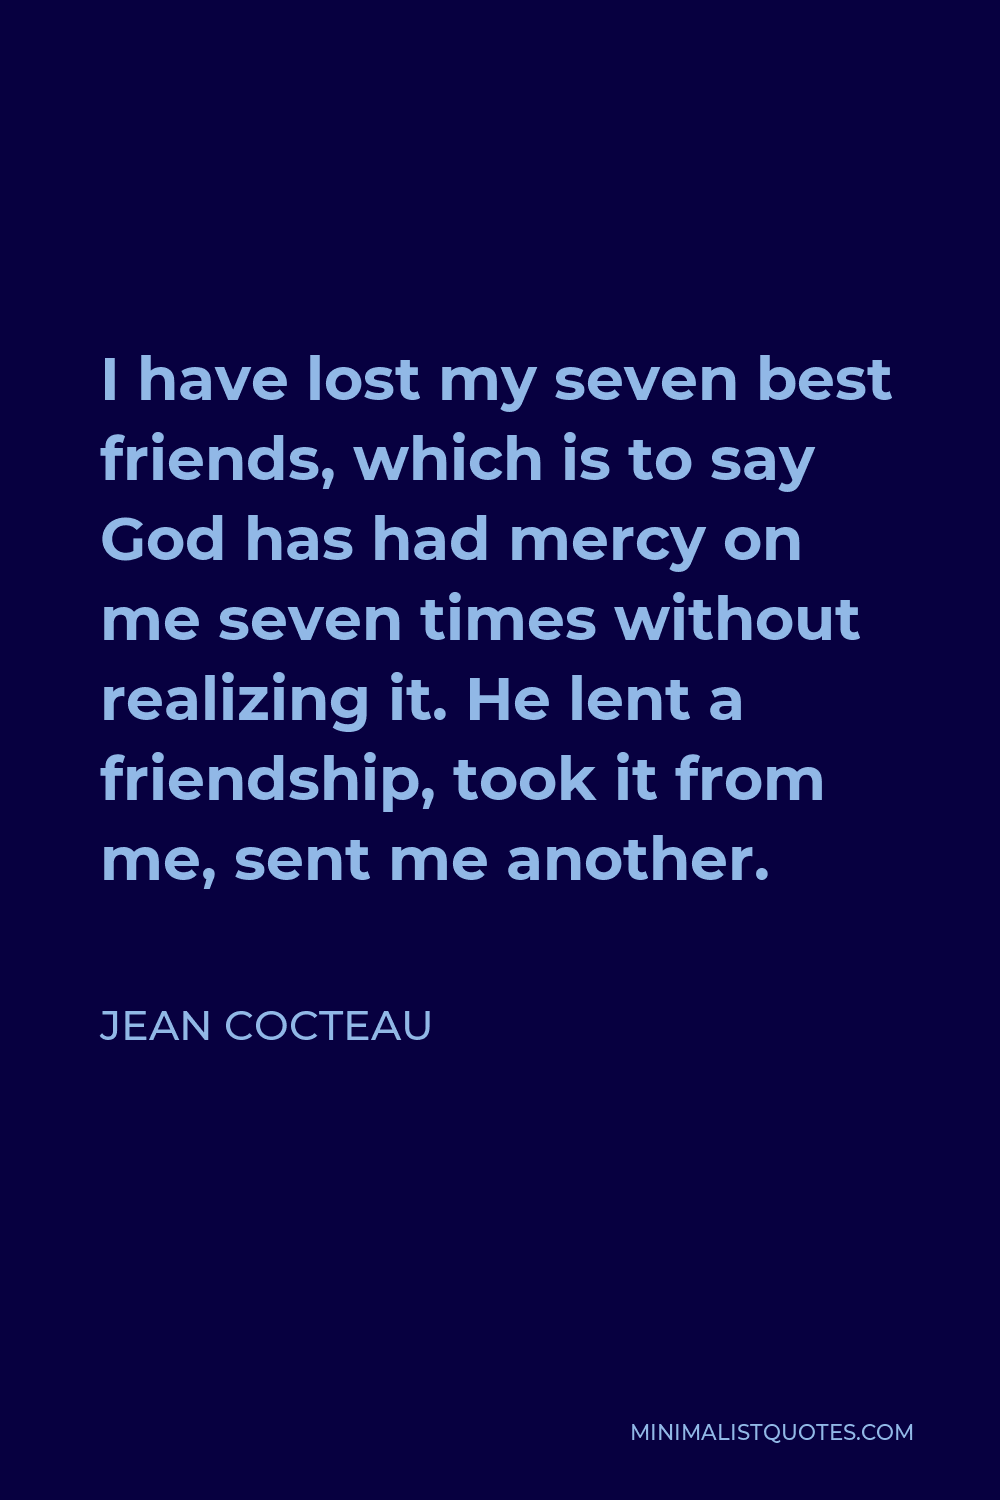 Jean Cocteau Quote - I have lost my seven best friends, which is to say God has had mercy on me seven times without realizing it. He lent a friendship, took it from me, sent me another.